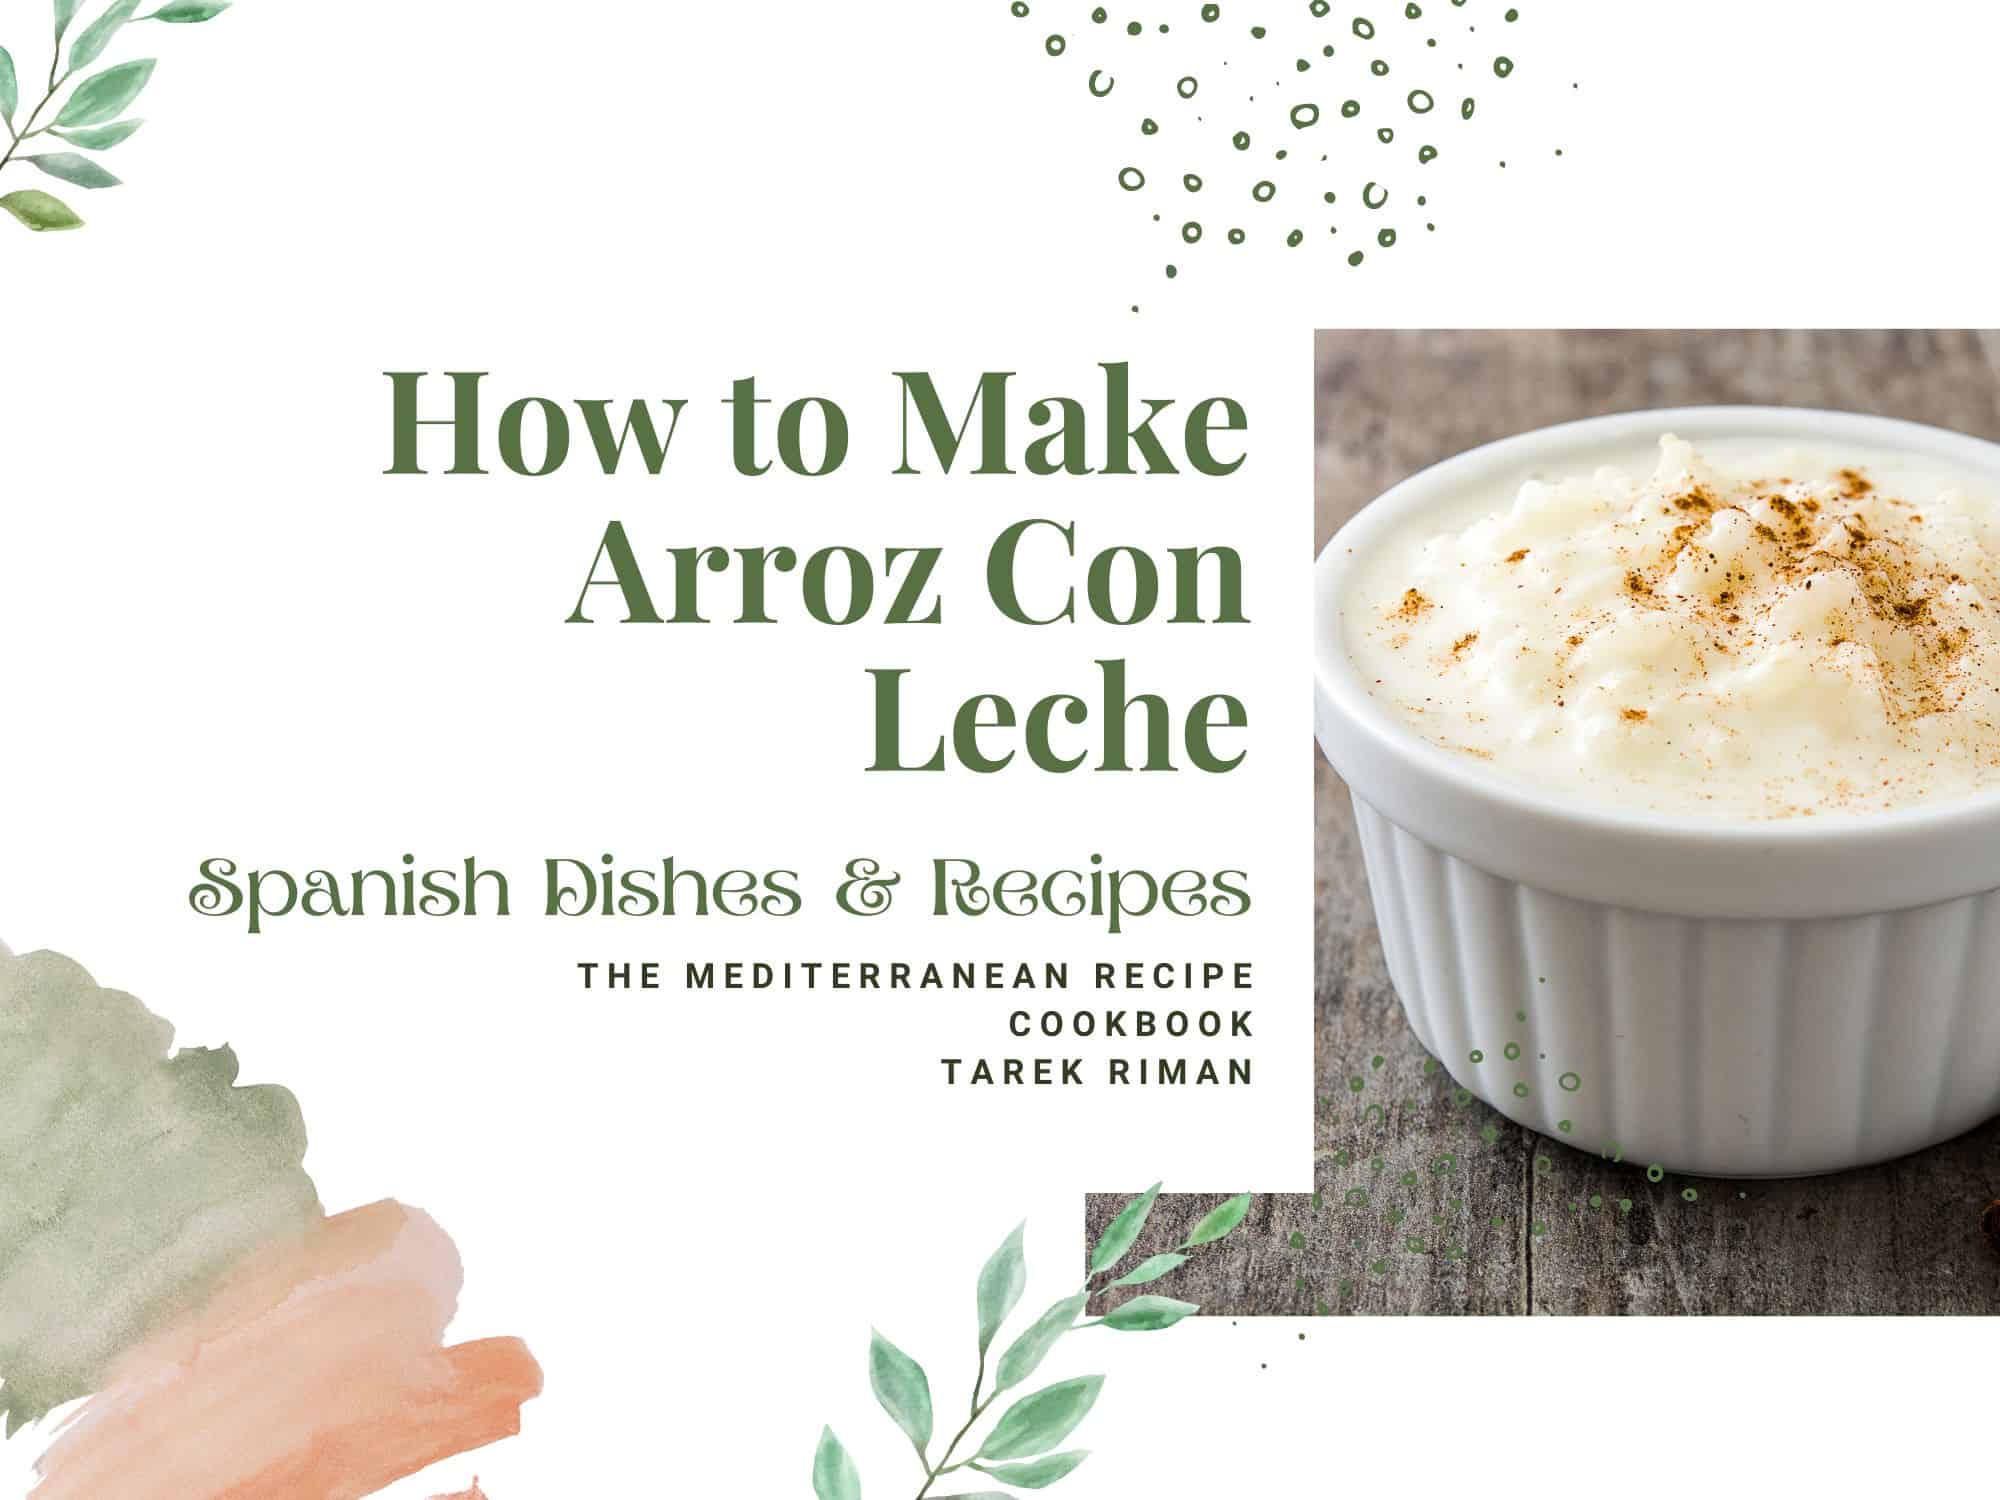 How to Make Arroz Con Leche – Spanish Rice Pudding